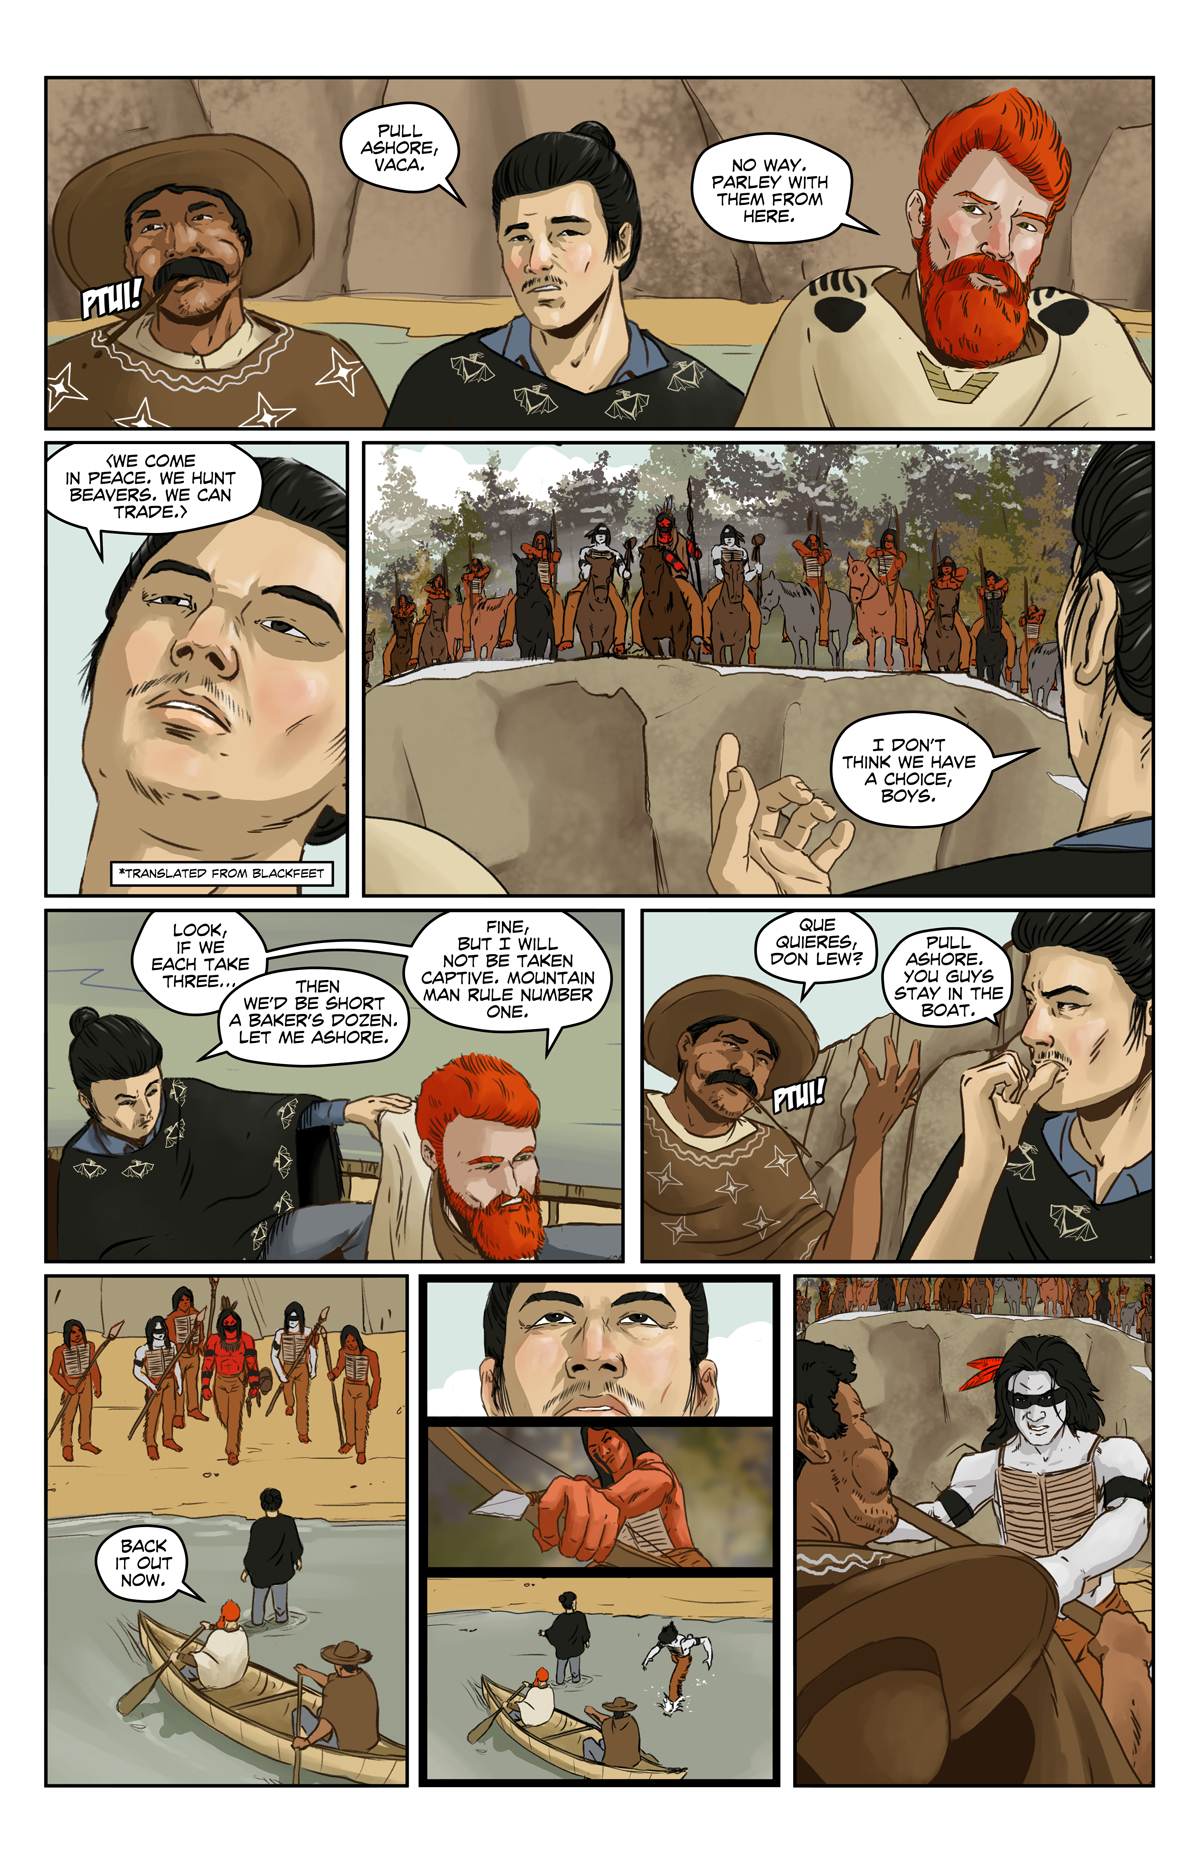 Episode 1, Page 4